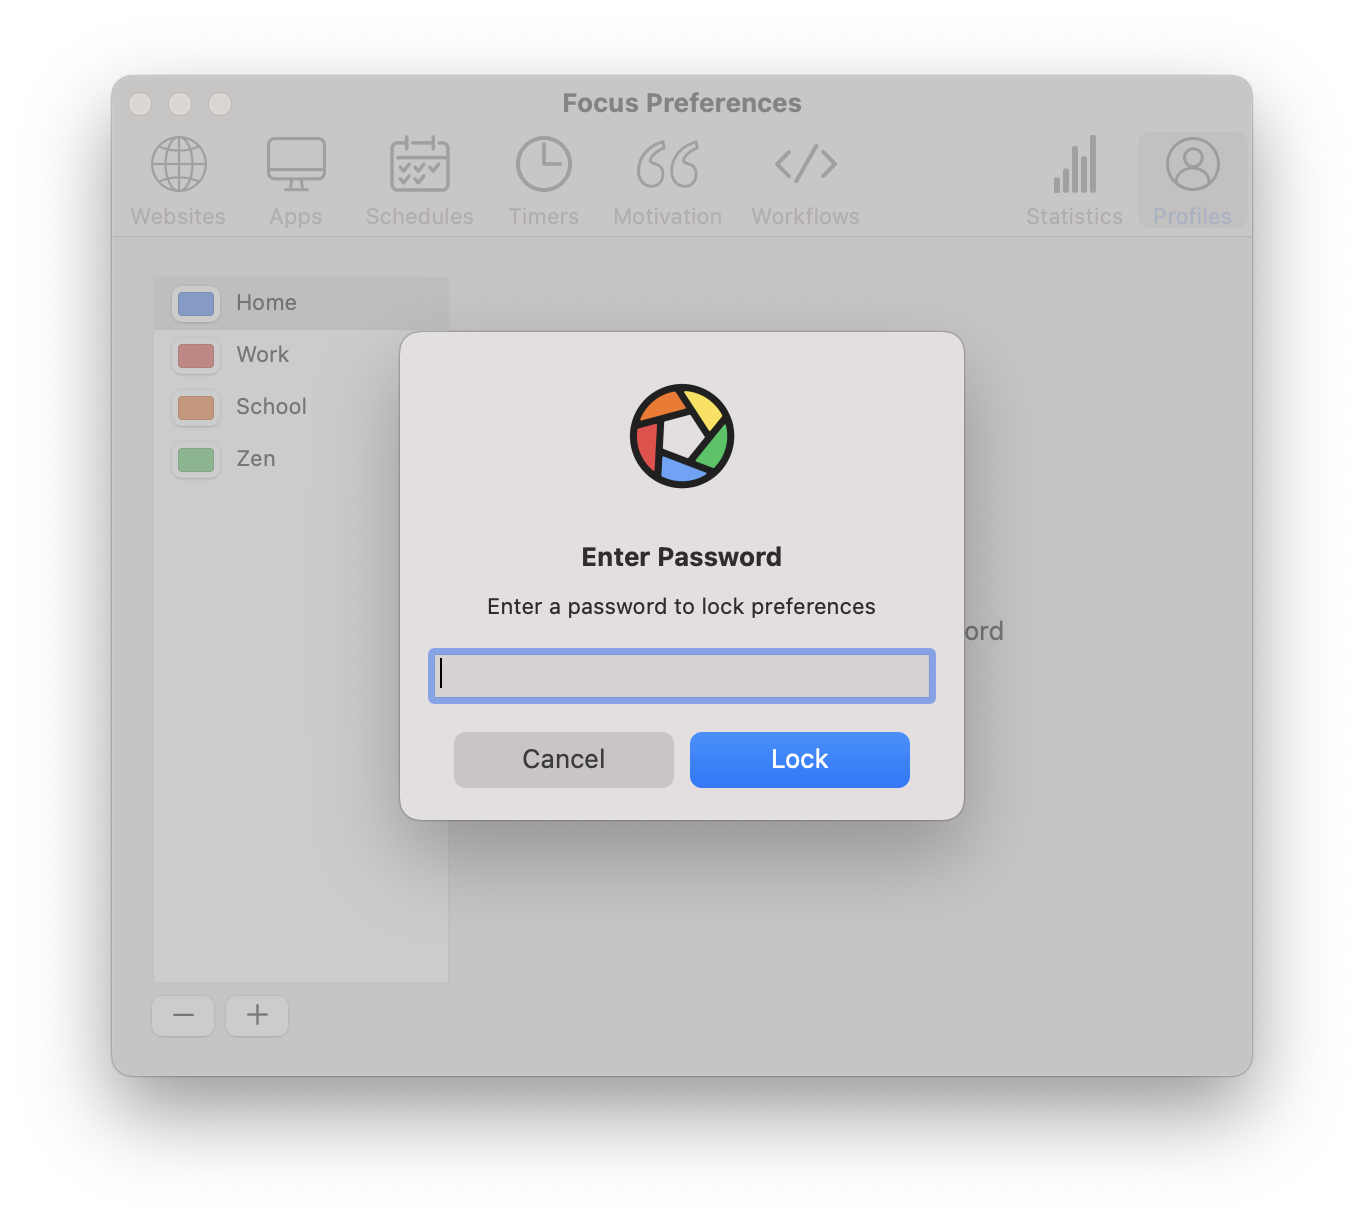 Focus enables you to lock any profile, preventing further changes without the password.